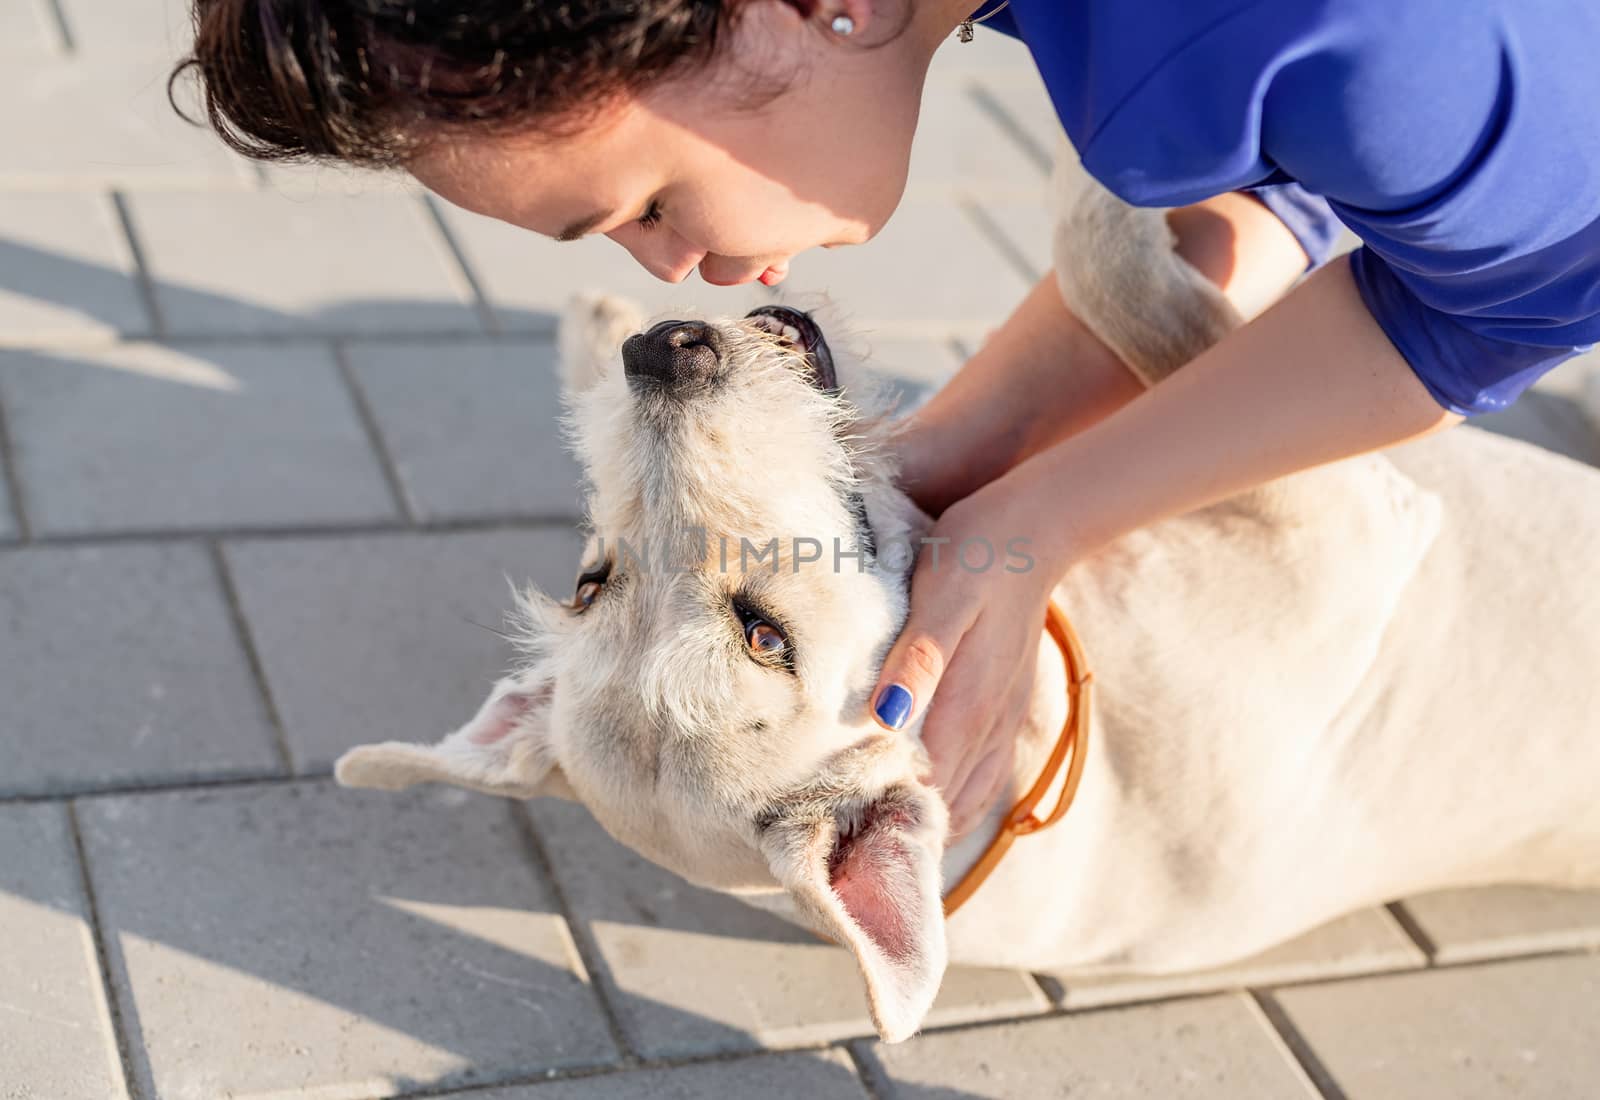 Pet care. Pet adoption. Young woman kissing her mixed breed dog